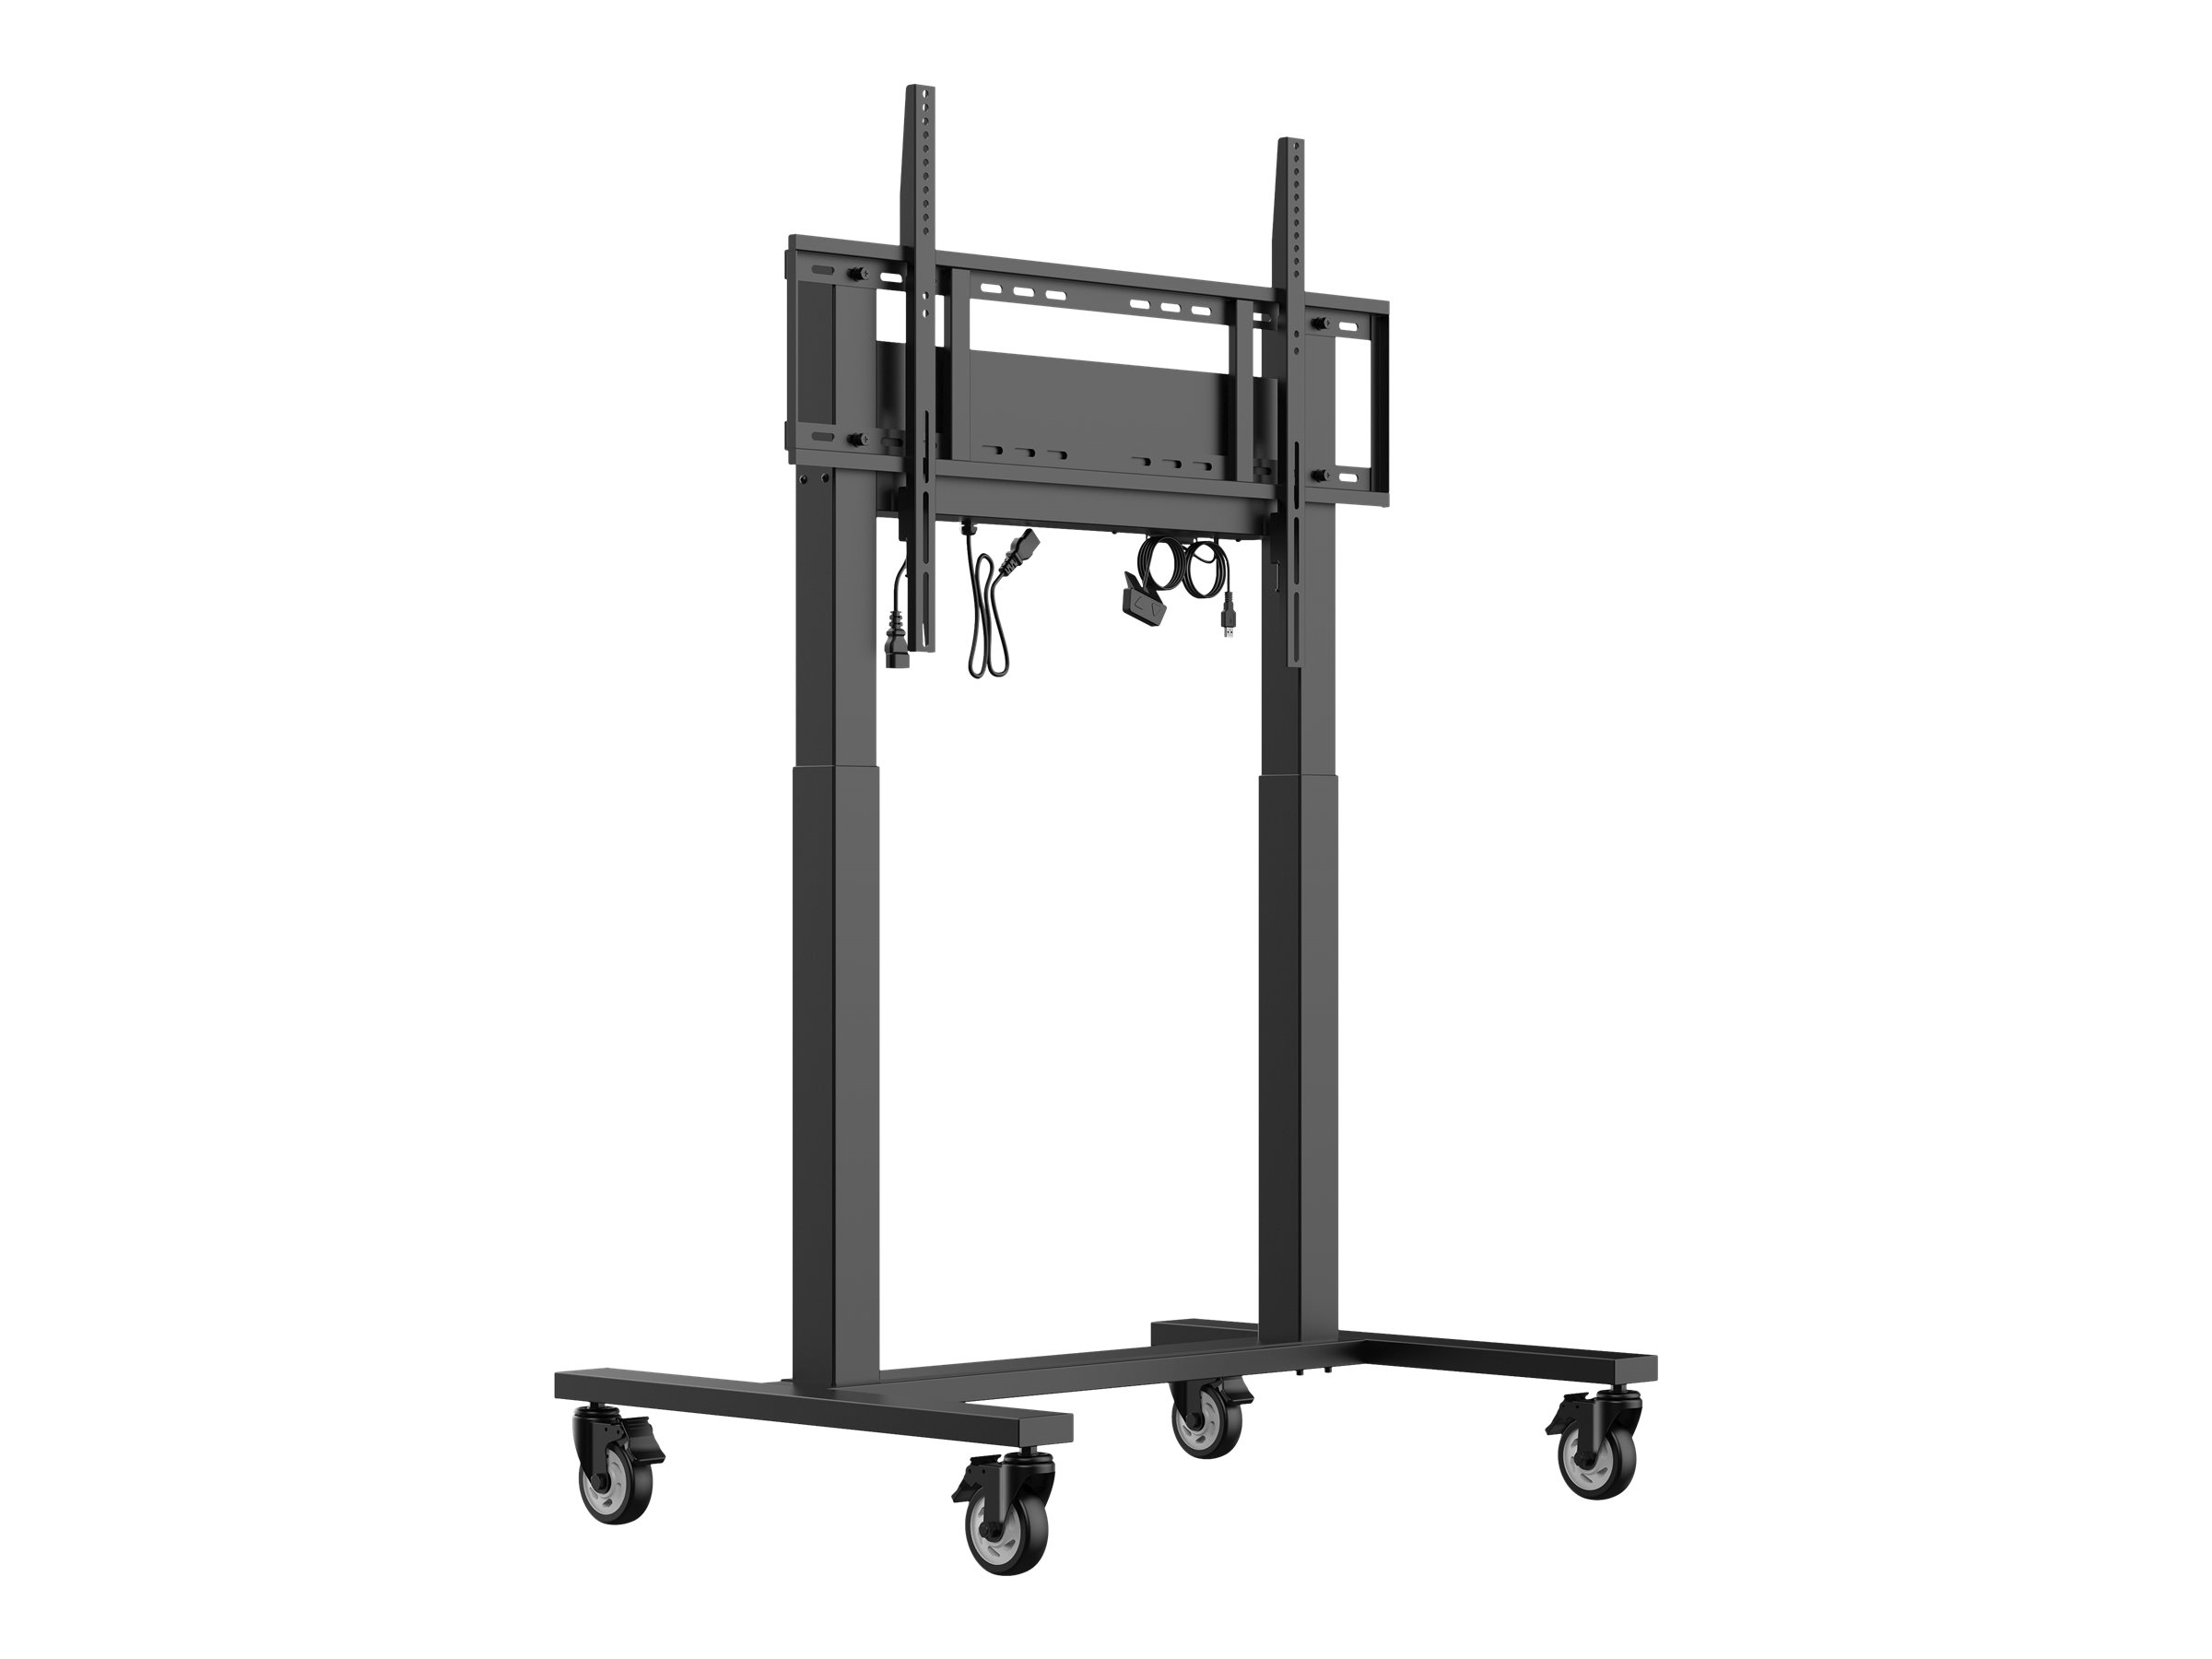 Floor lift on wheels, max. load 80kg (86") , Electric height adjustable with 500mm range, centre 993-1493mm, max VESA 800x600, anti-collison, Wired control pad and software control from iiyama iLFD TExx series.